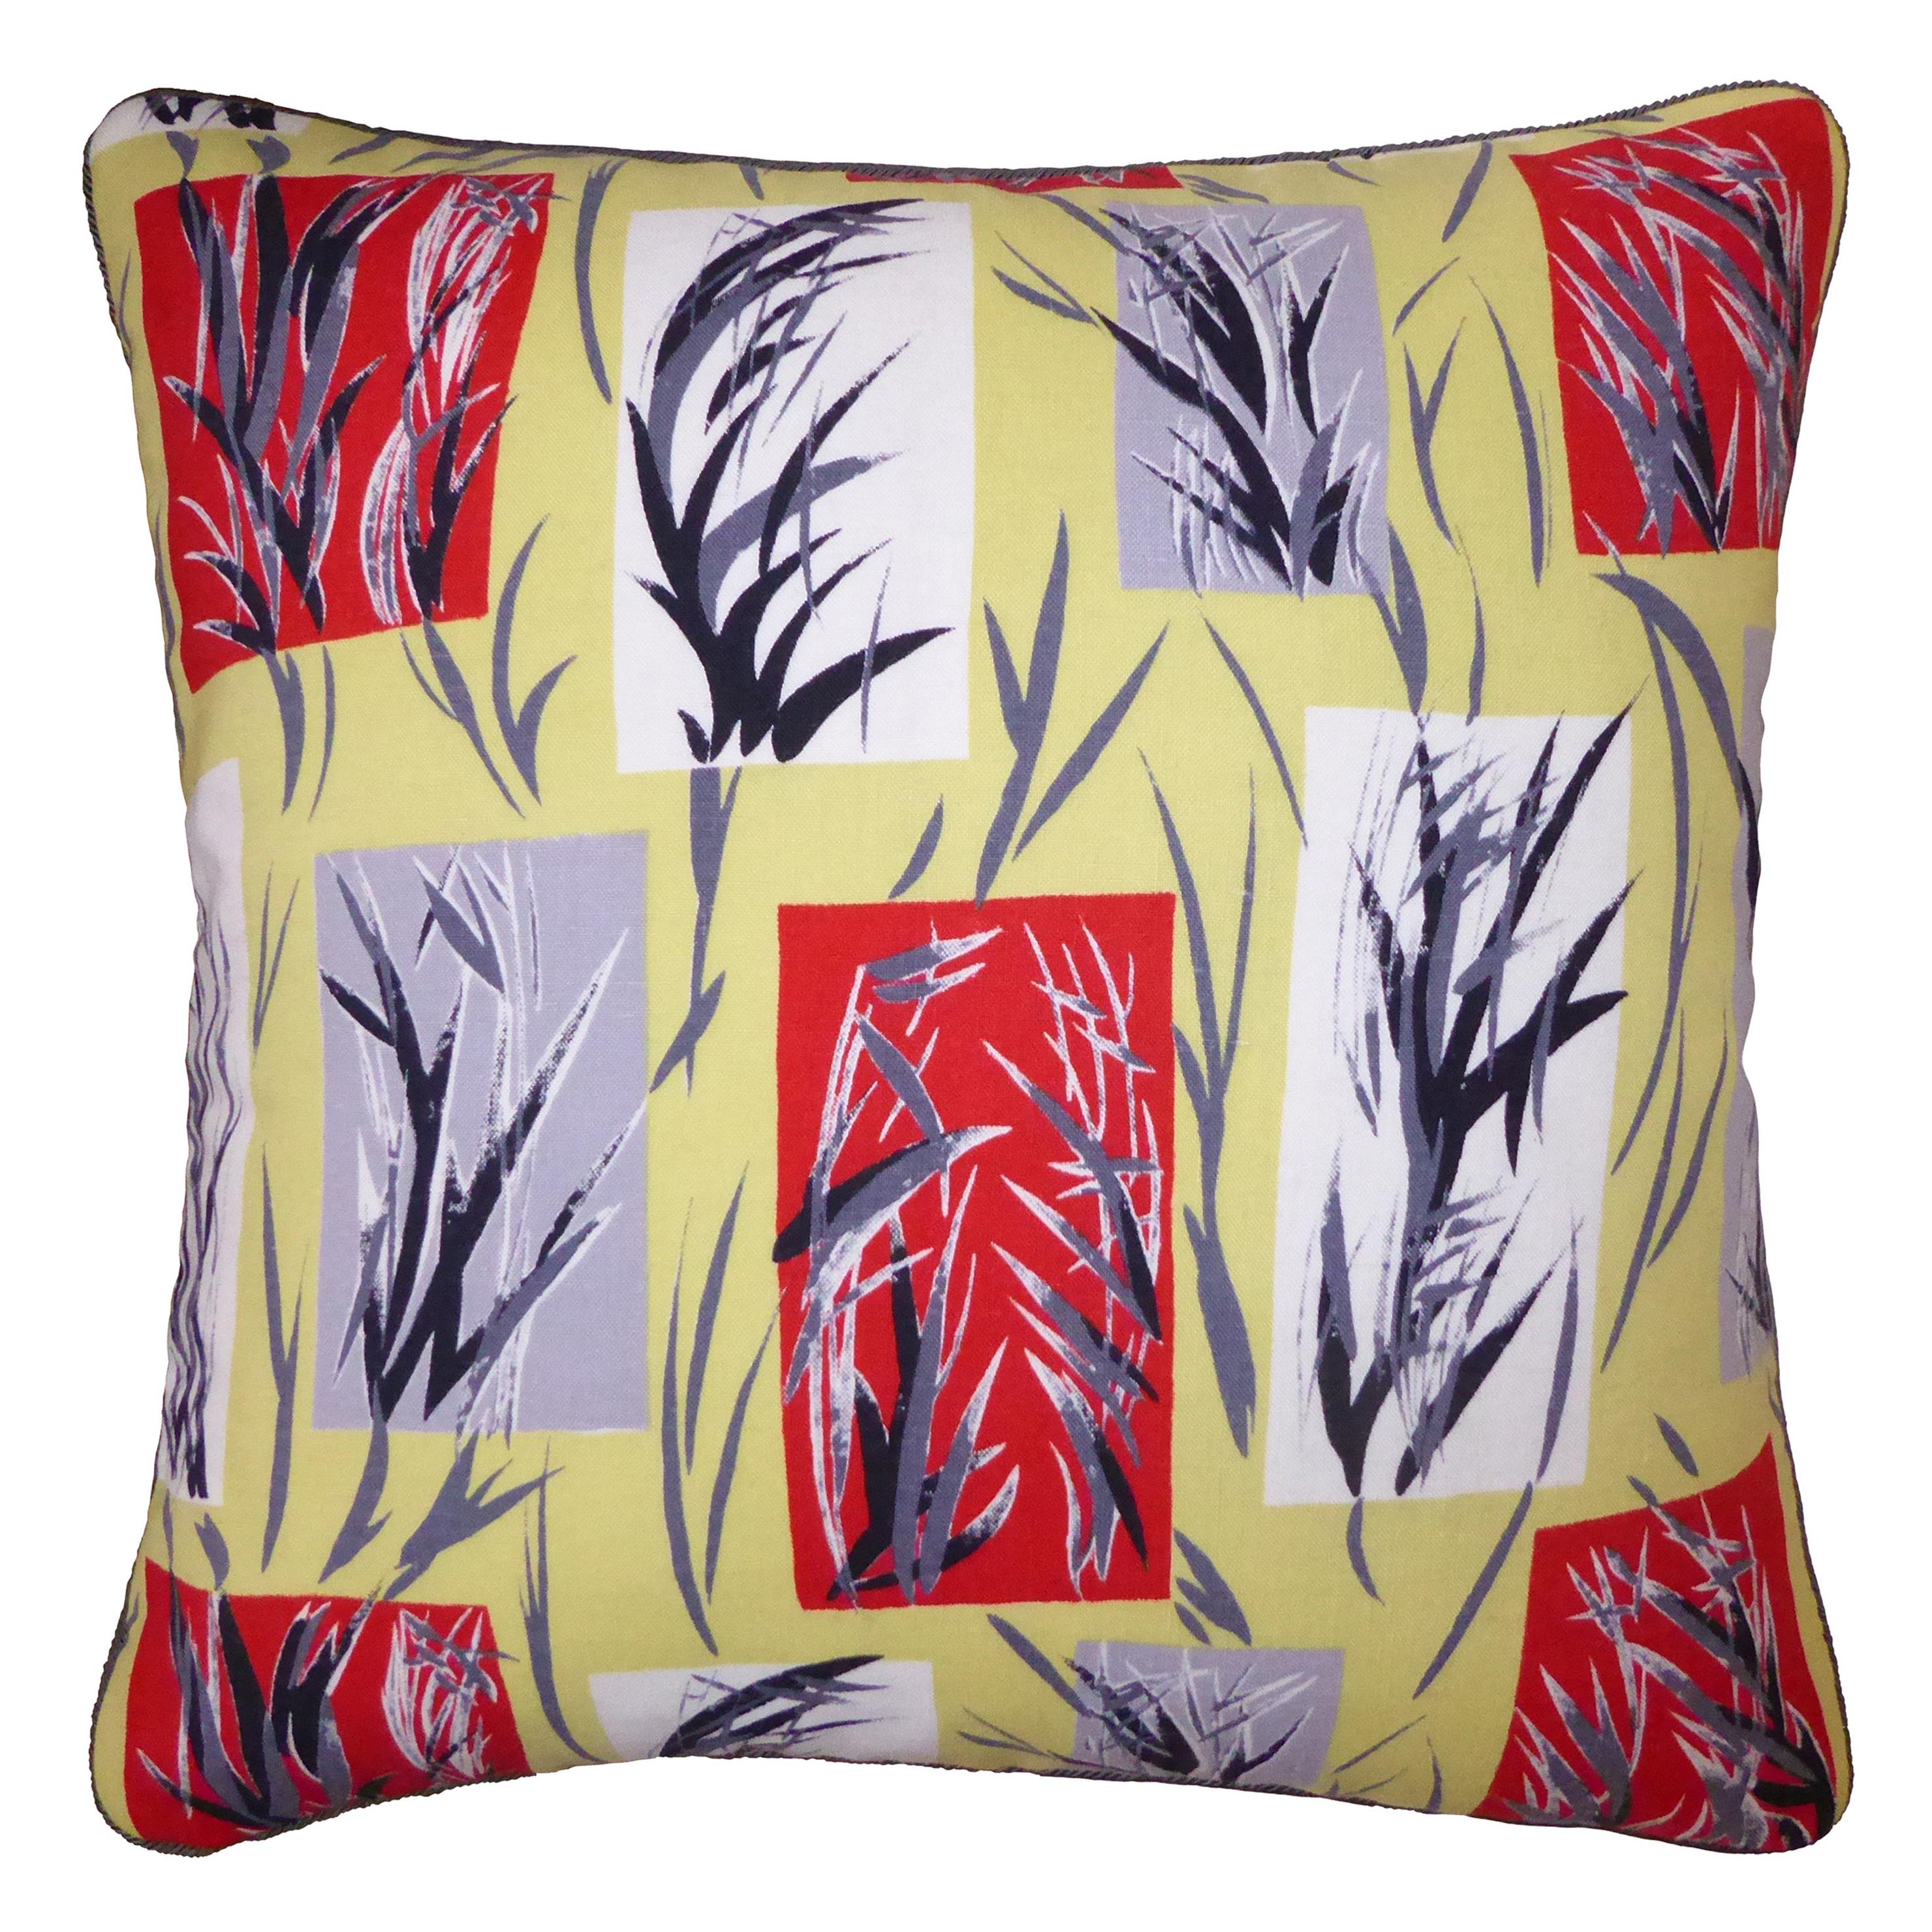 Vintage Cushions, Bespoke-Made Luxury Pillow, 'Bamboo Leaves', Made in UK